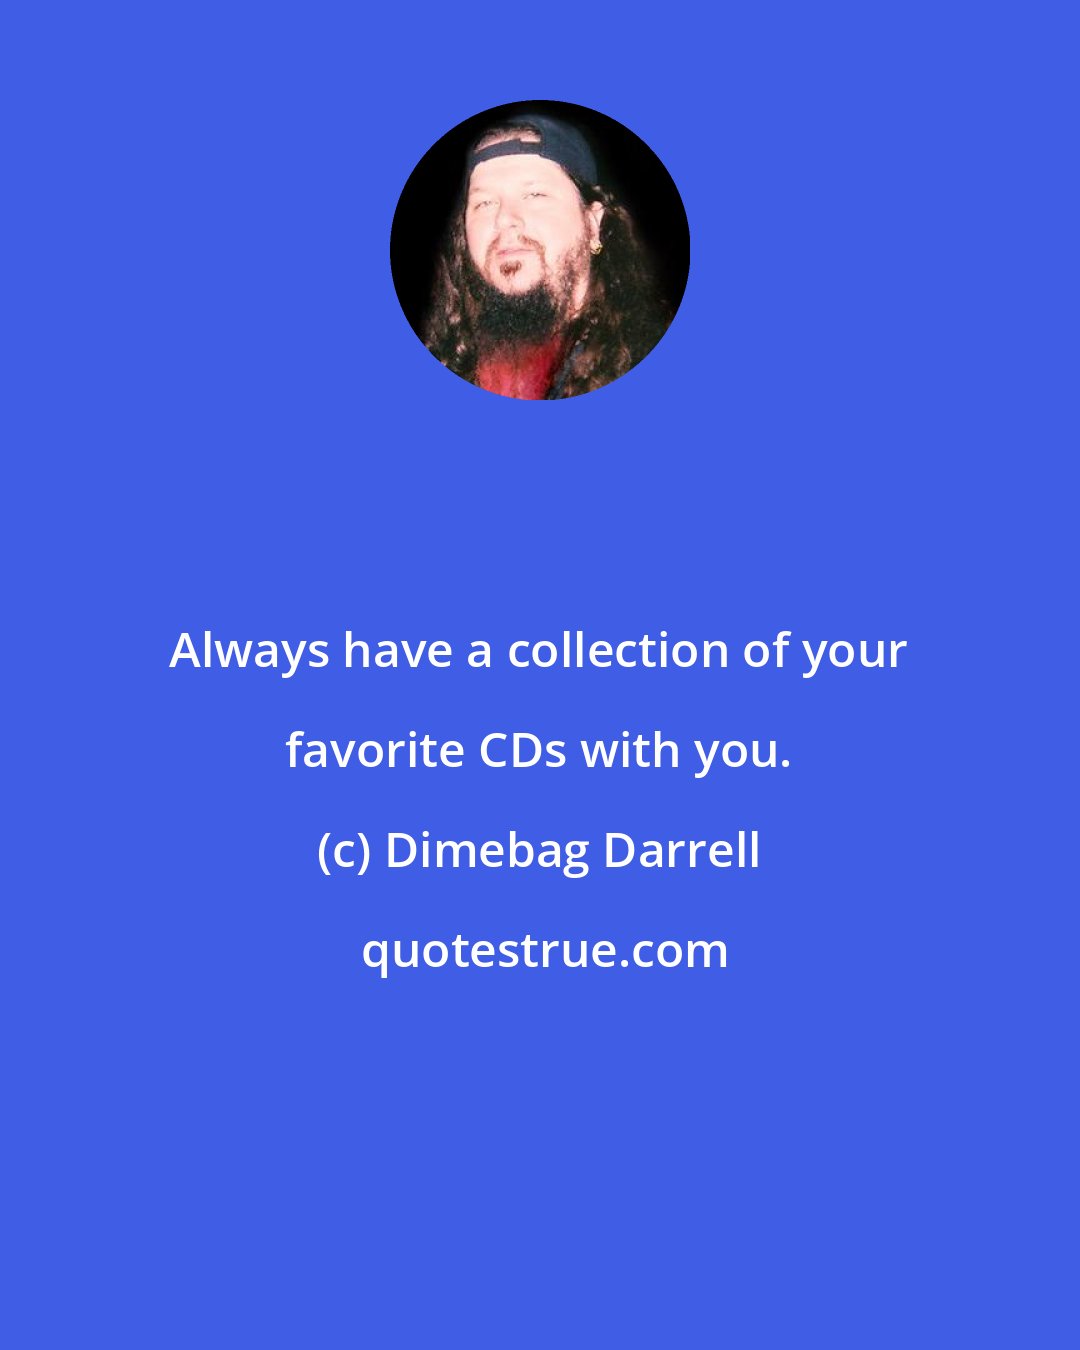 Dimebag Darrell: Always have a collection of your favorite CDs with you.